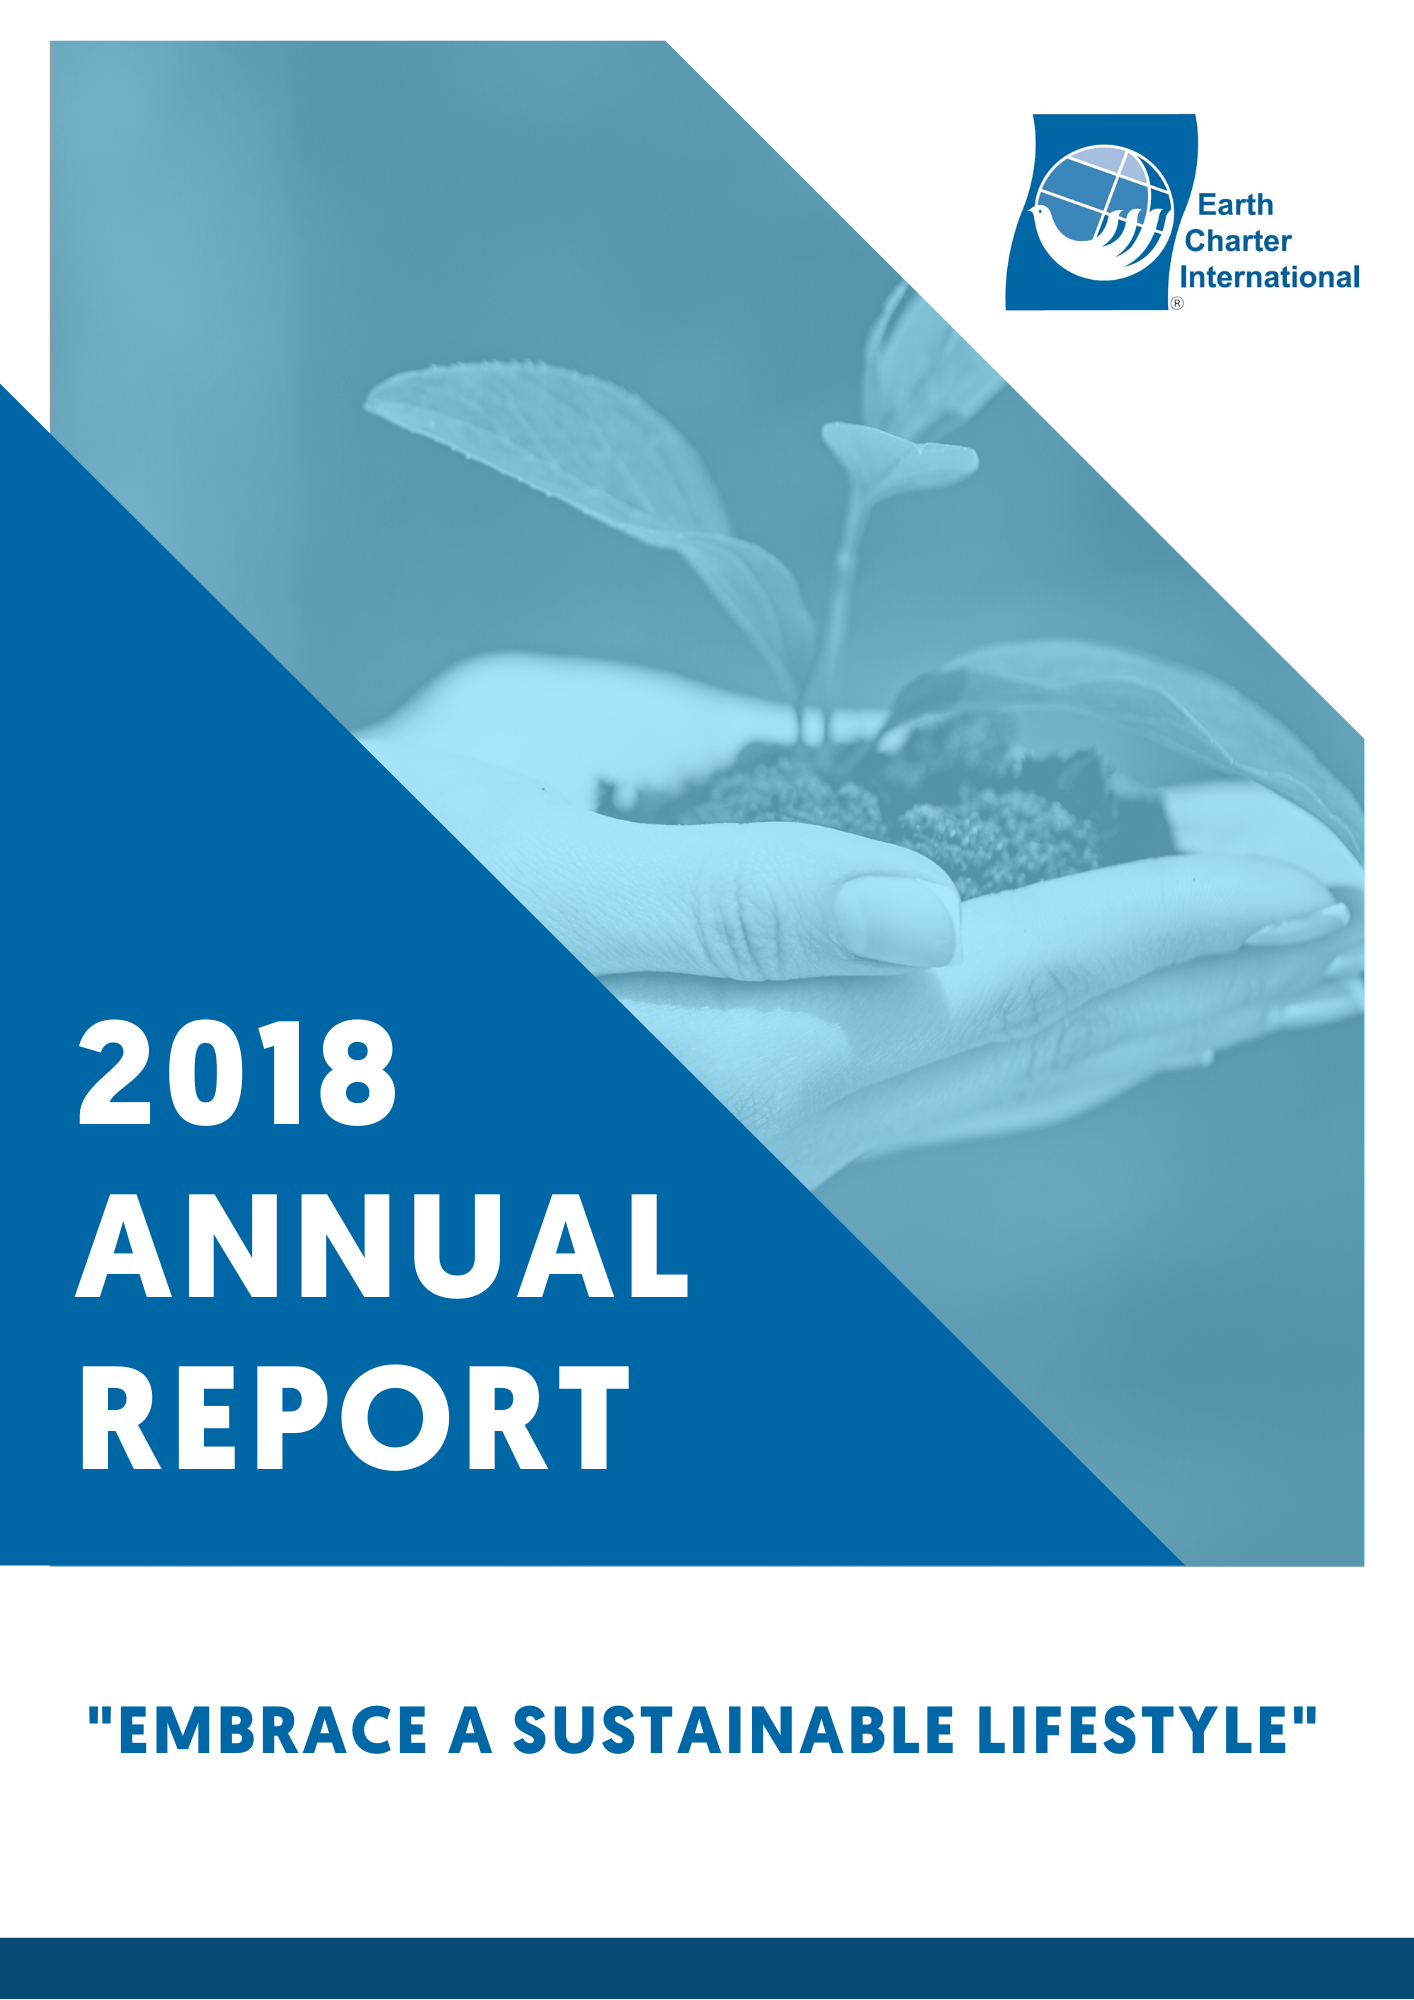 2018 Annual Report -Earth Charter International